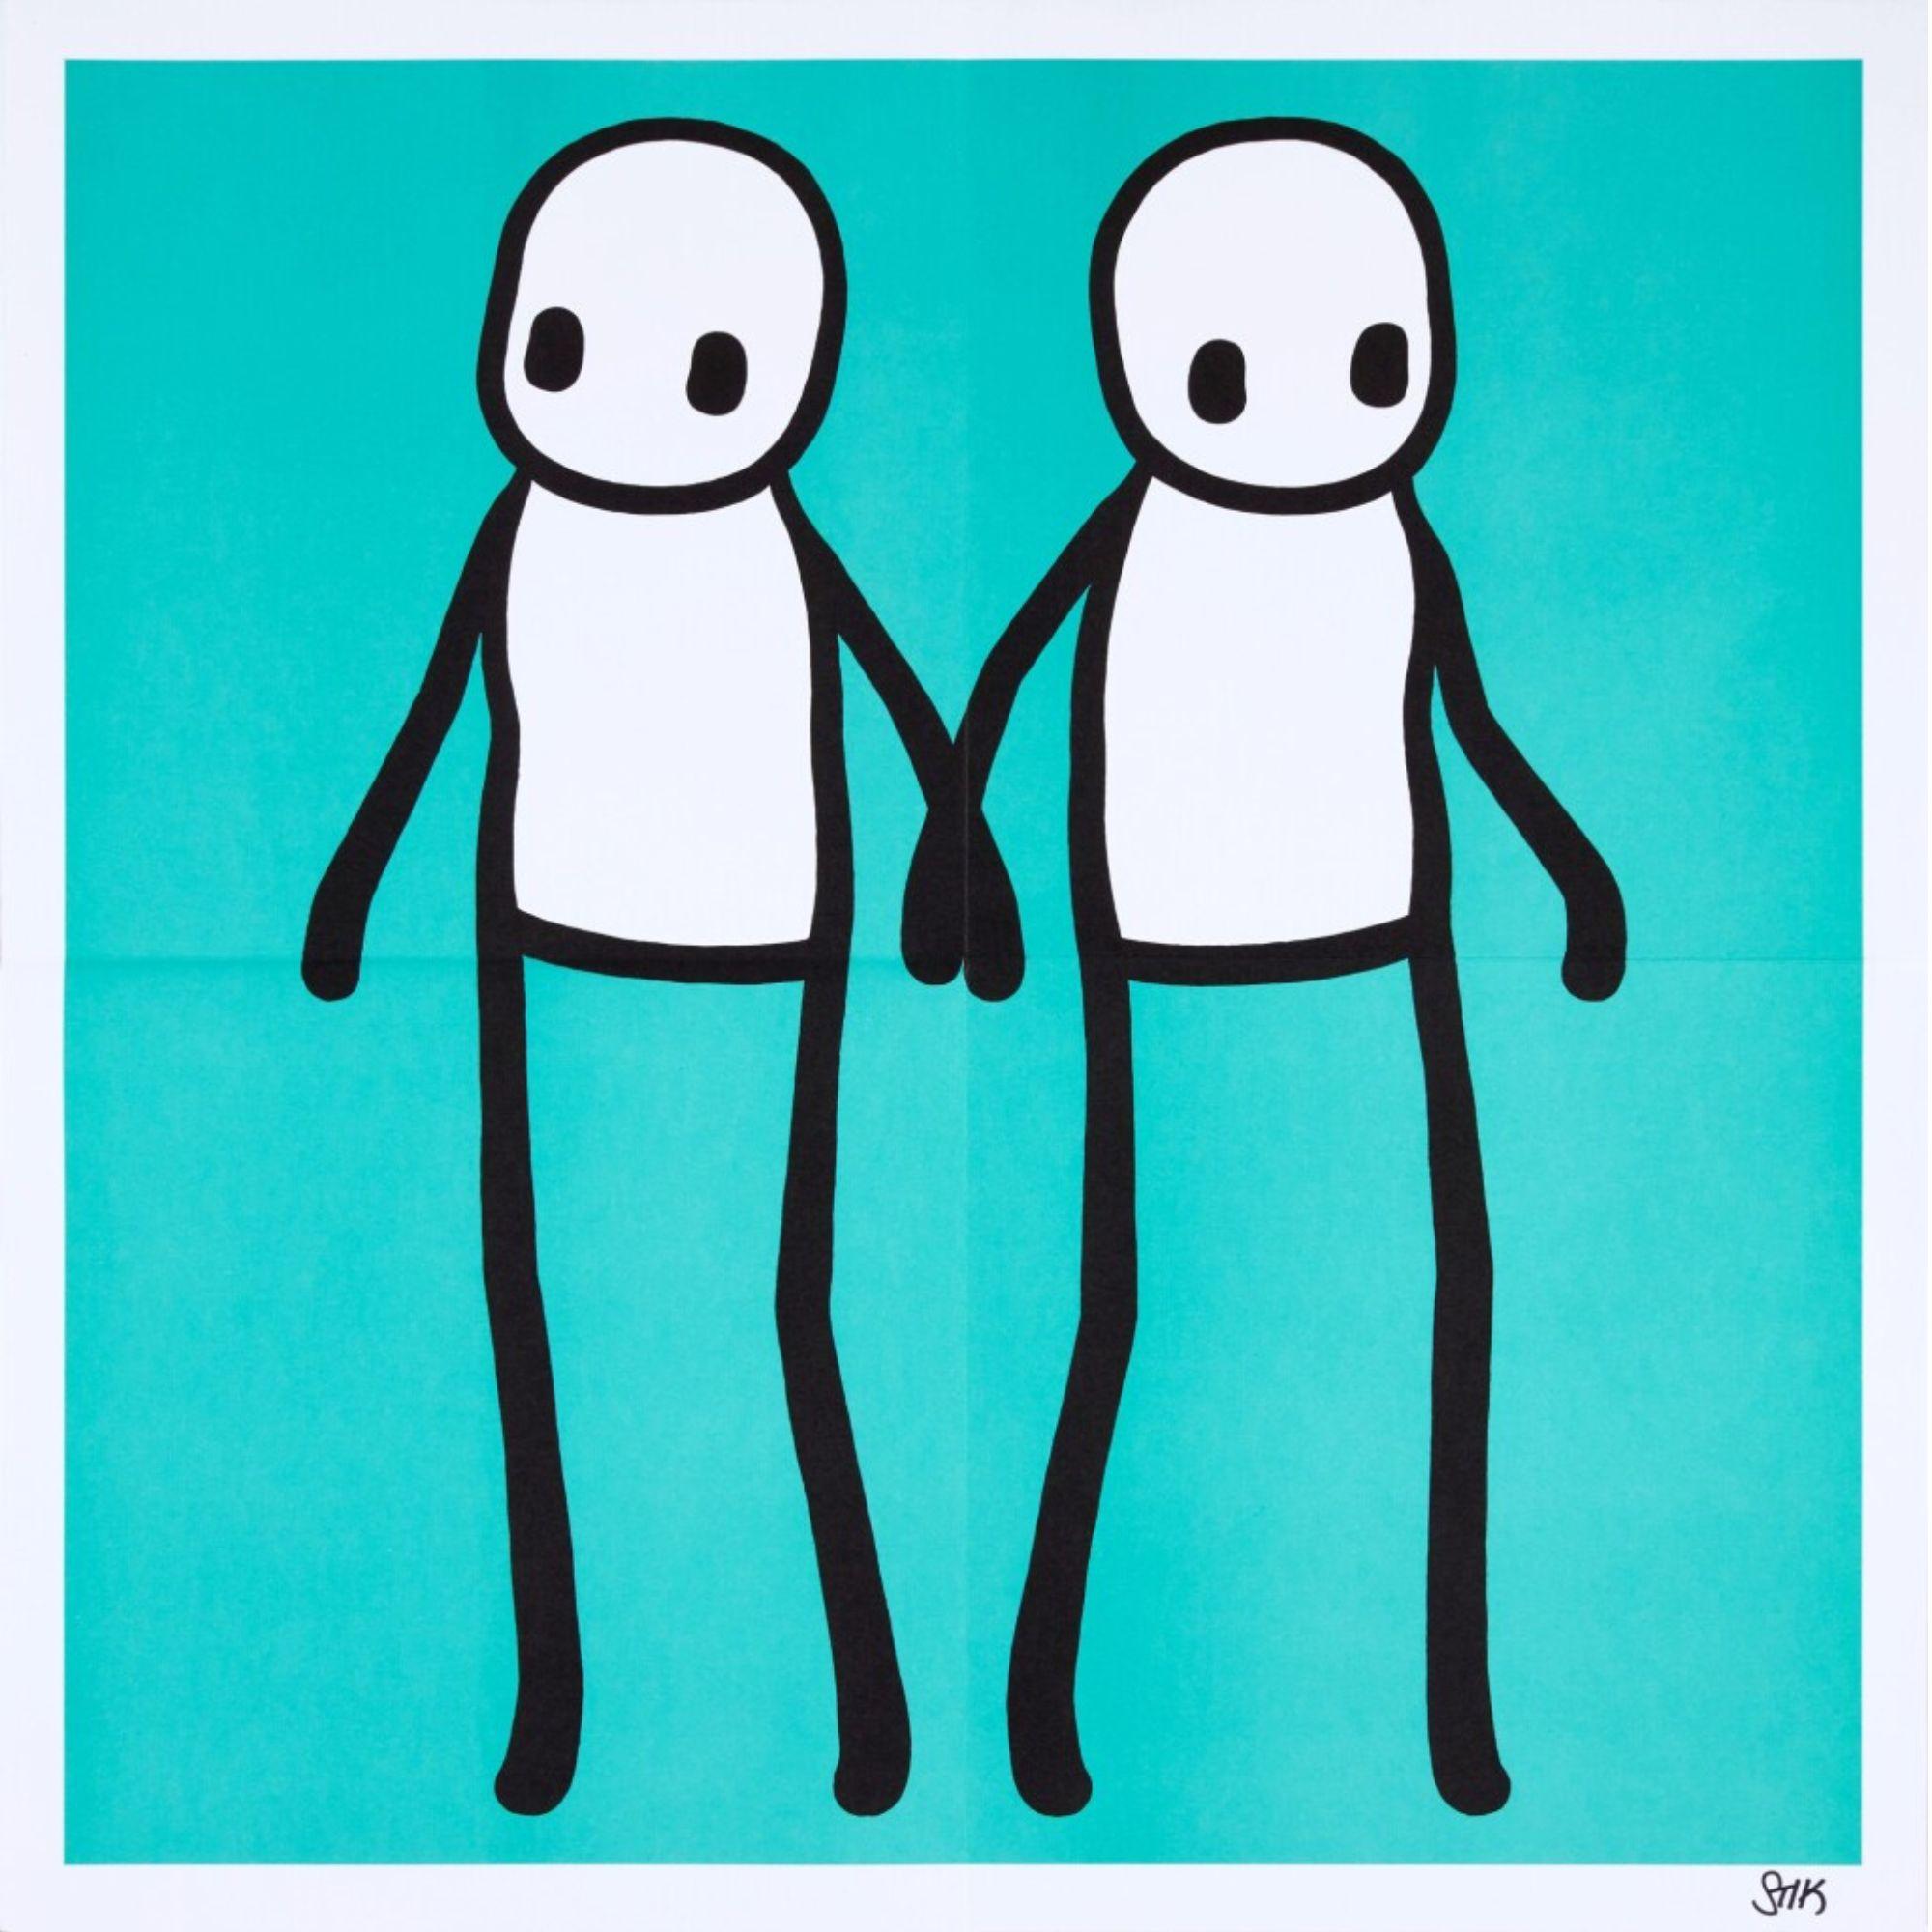 Holding Hands Teal (Signed) - Print by Stik